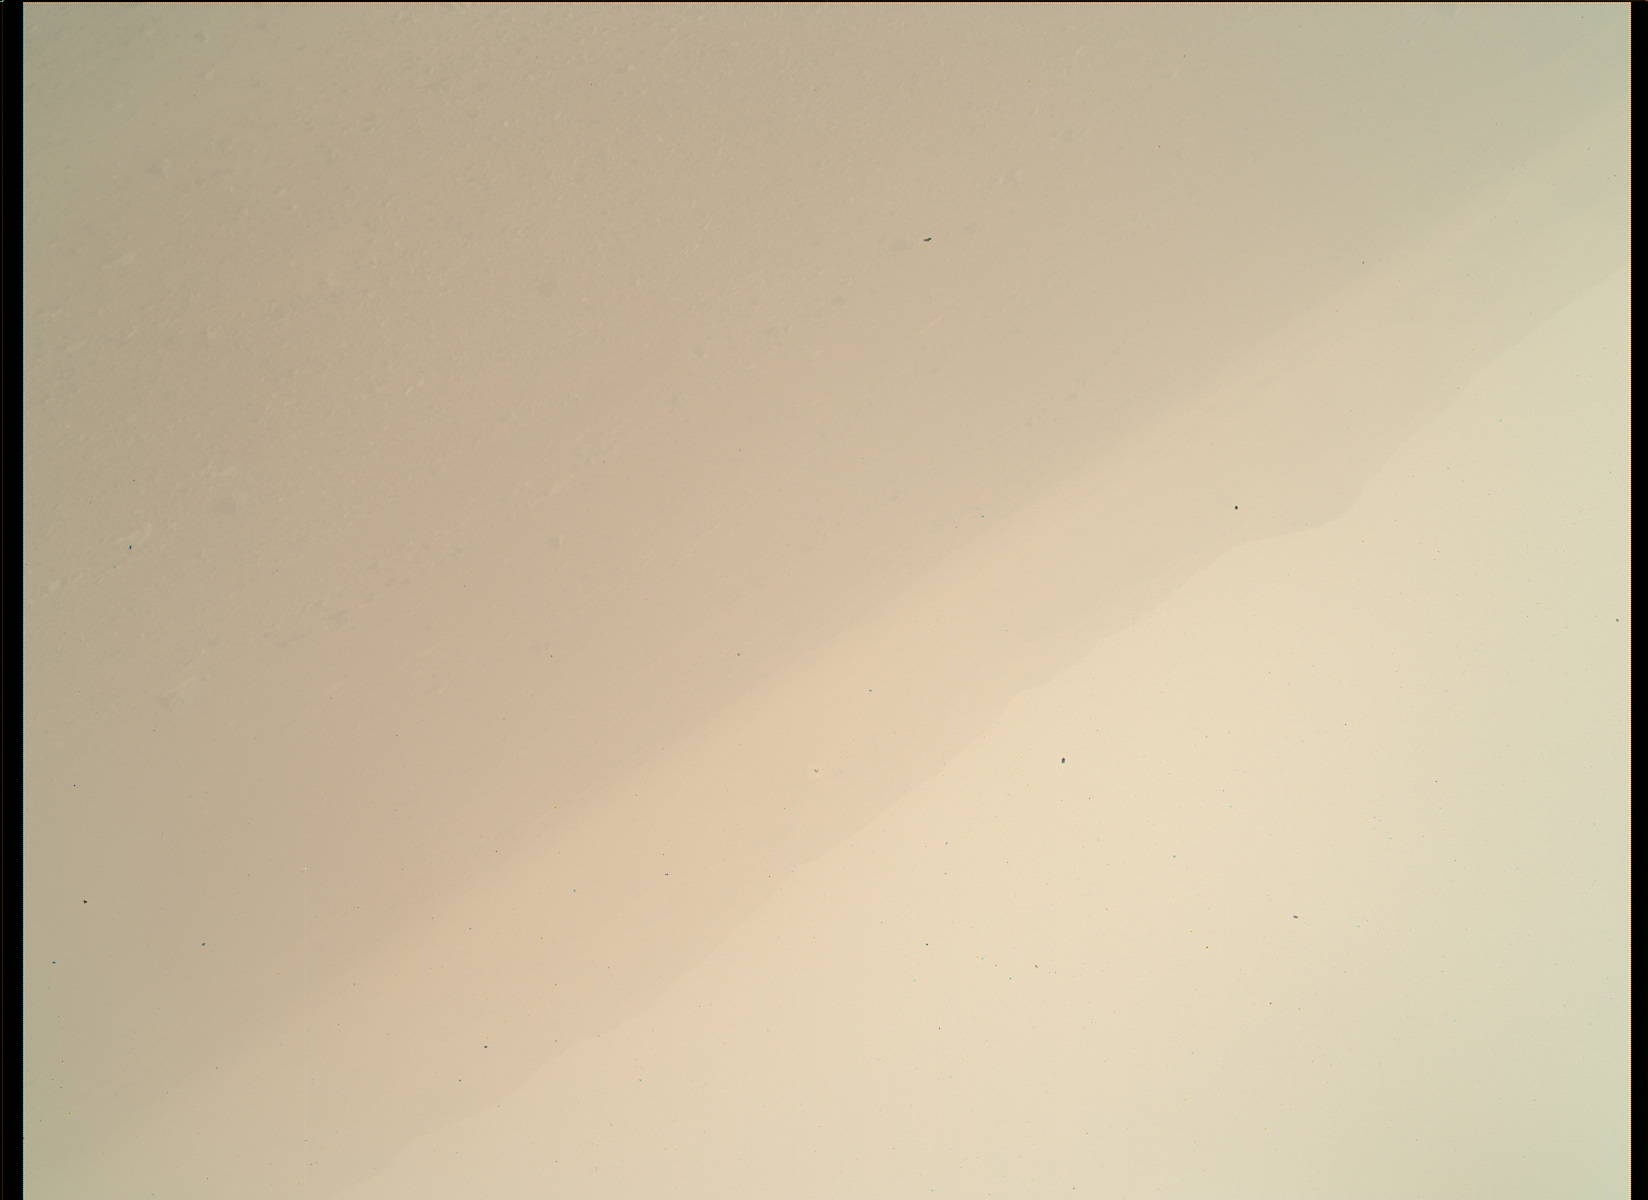 Nasa's Mars rover Curiosity acquired this image using its Mars Hand Lens Imager (MAHLI) on Sol 1